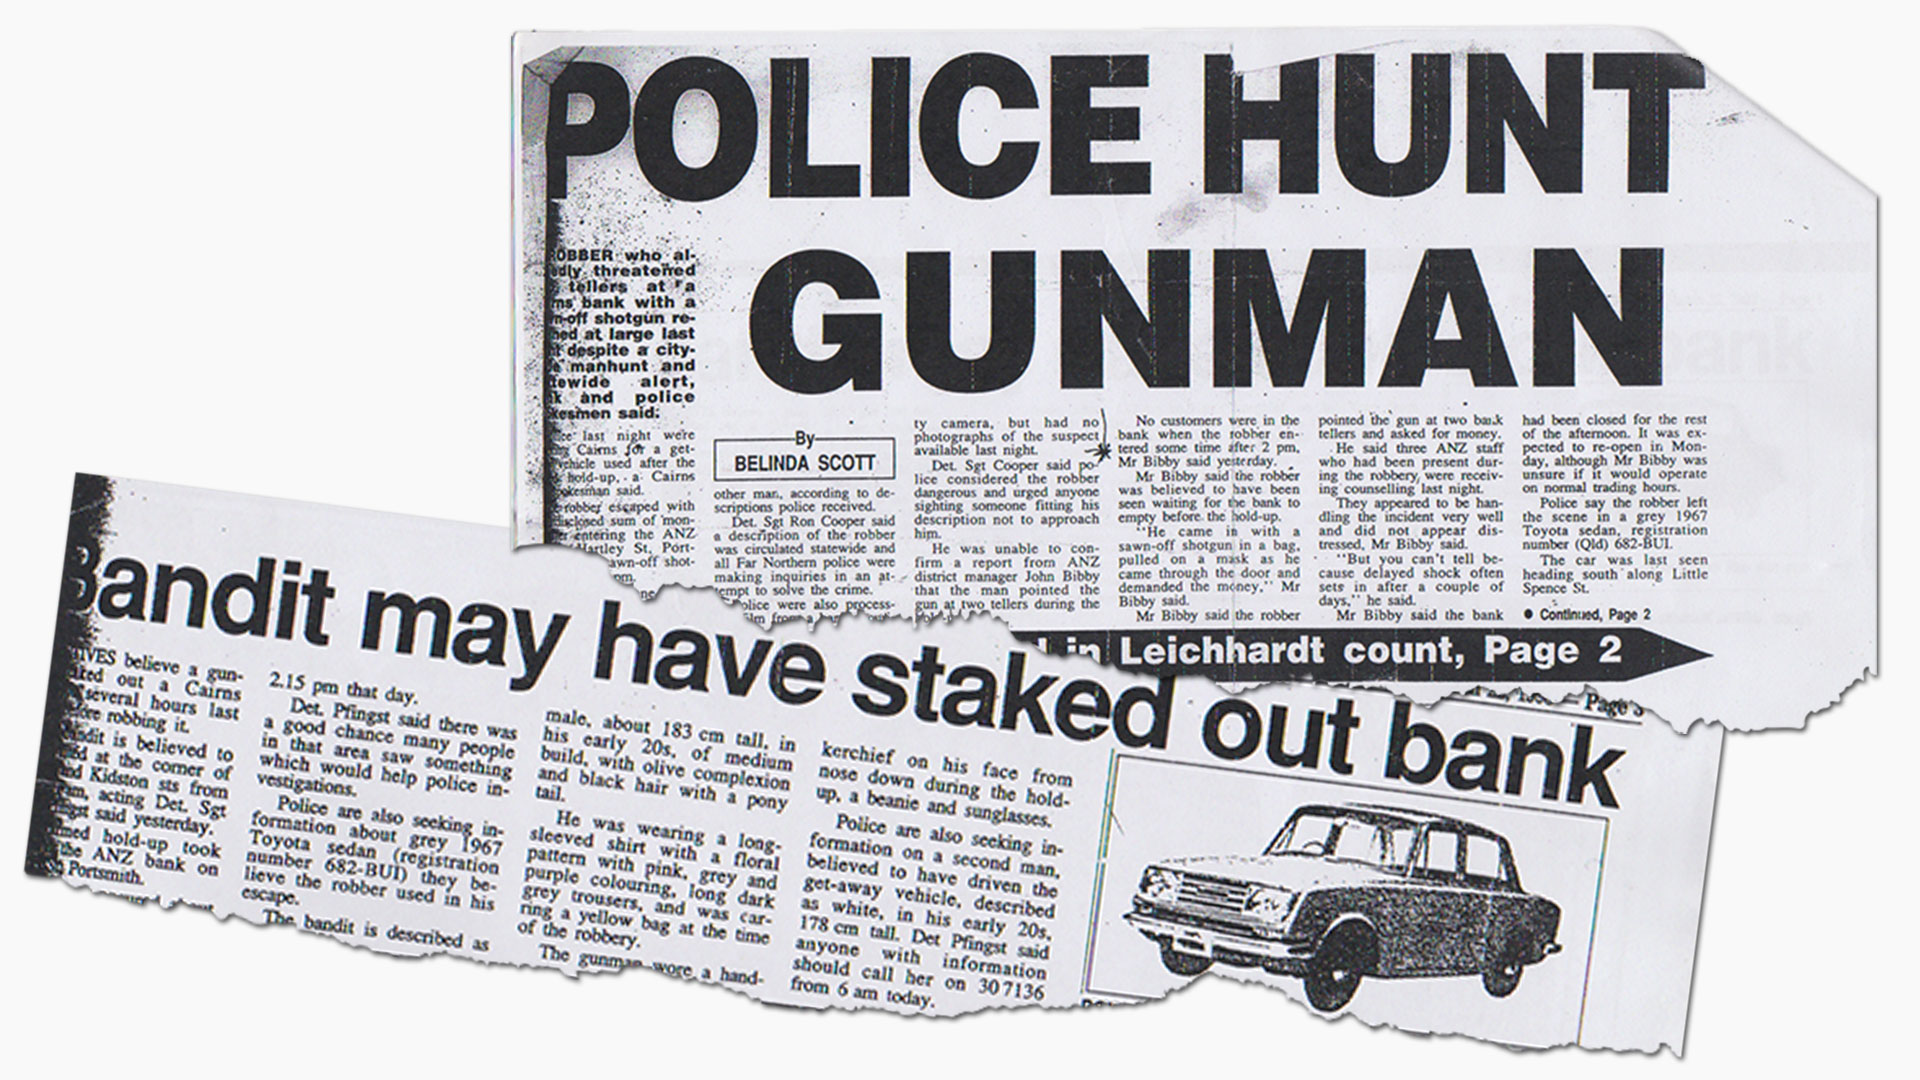 Newspaper excerpts about the robbery from 1993.